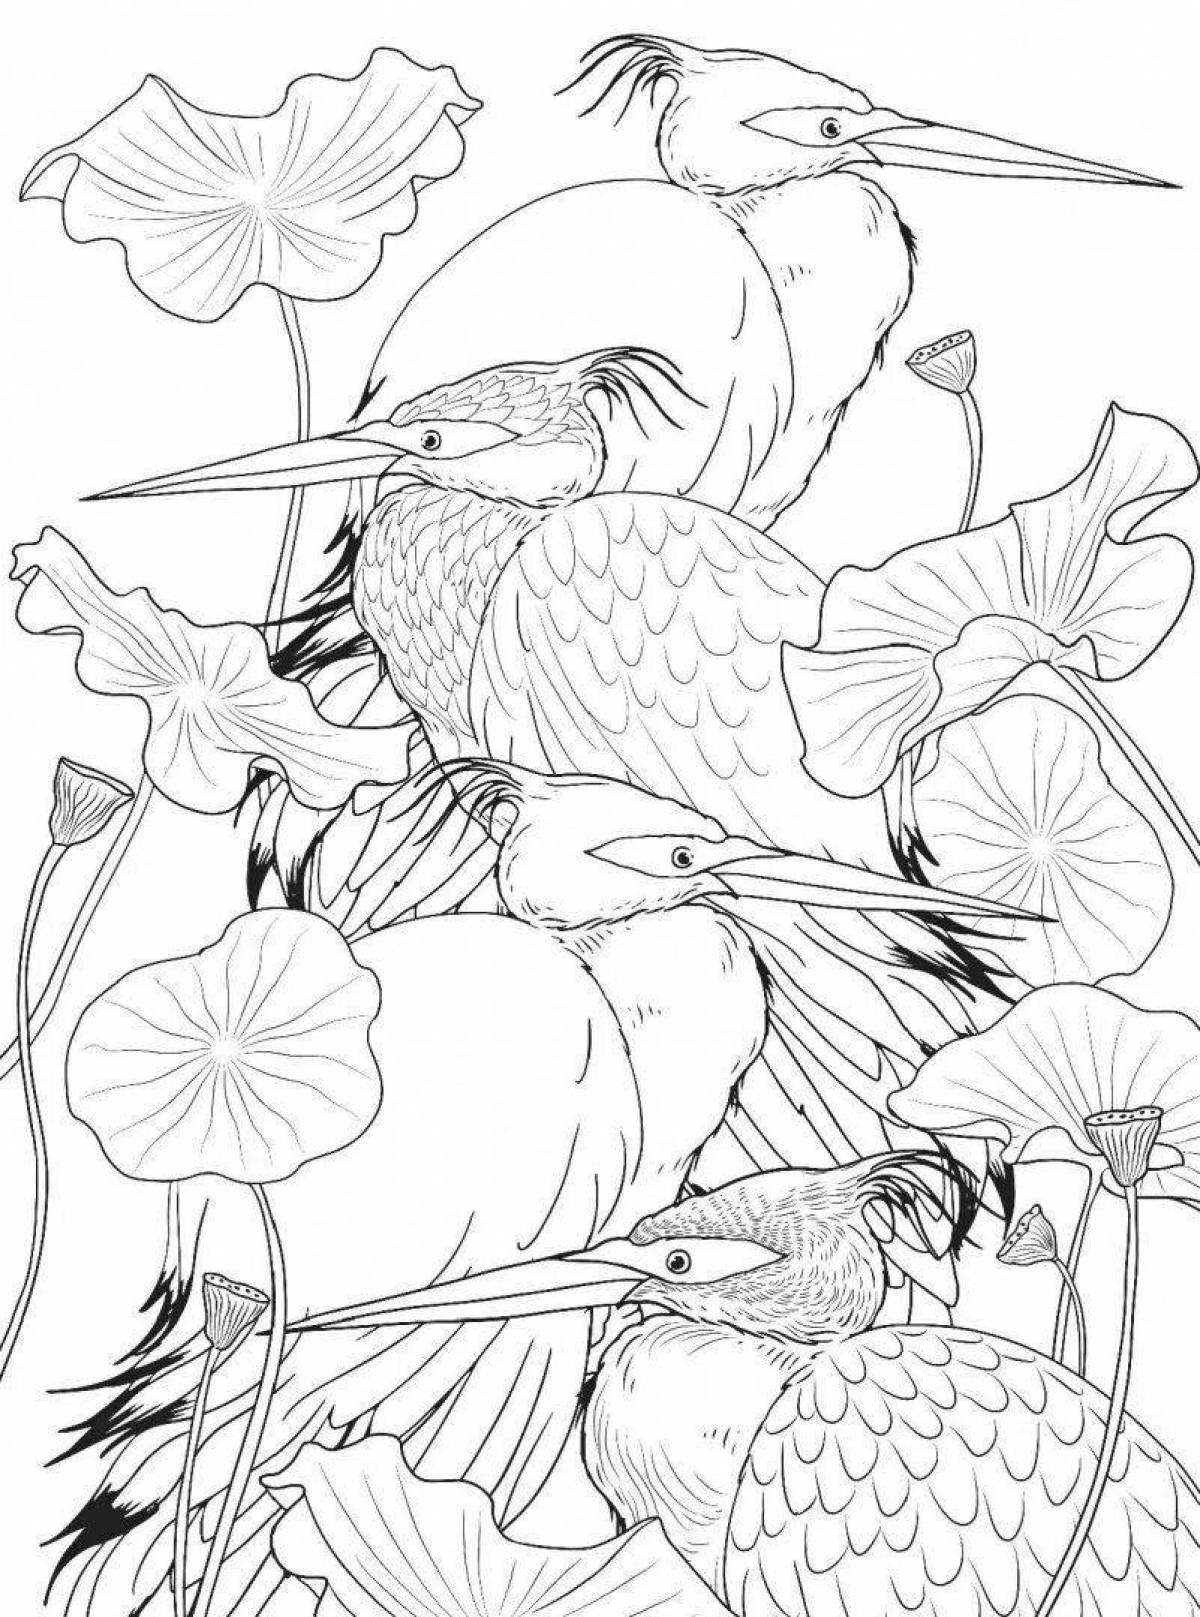 Fantastic bird of paradise coloring page